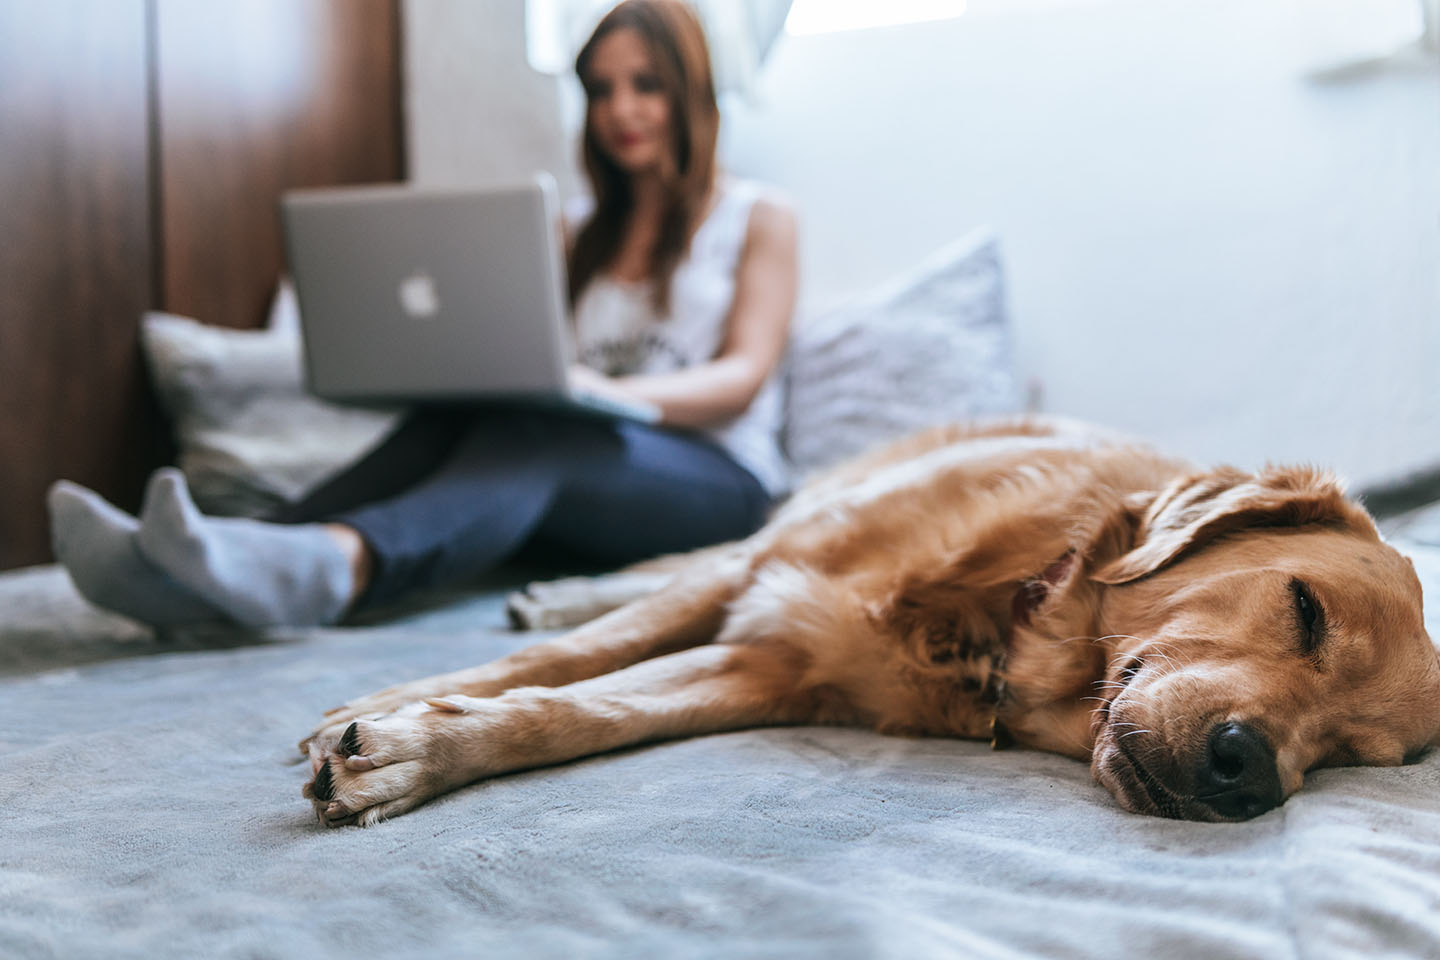 A dog sleeping on a bed next to woman on a laptop